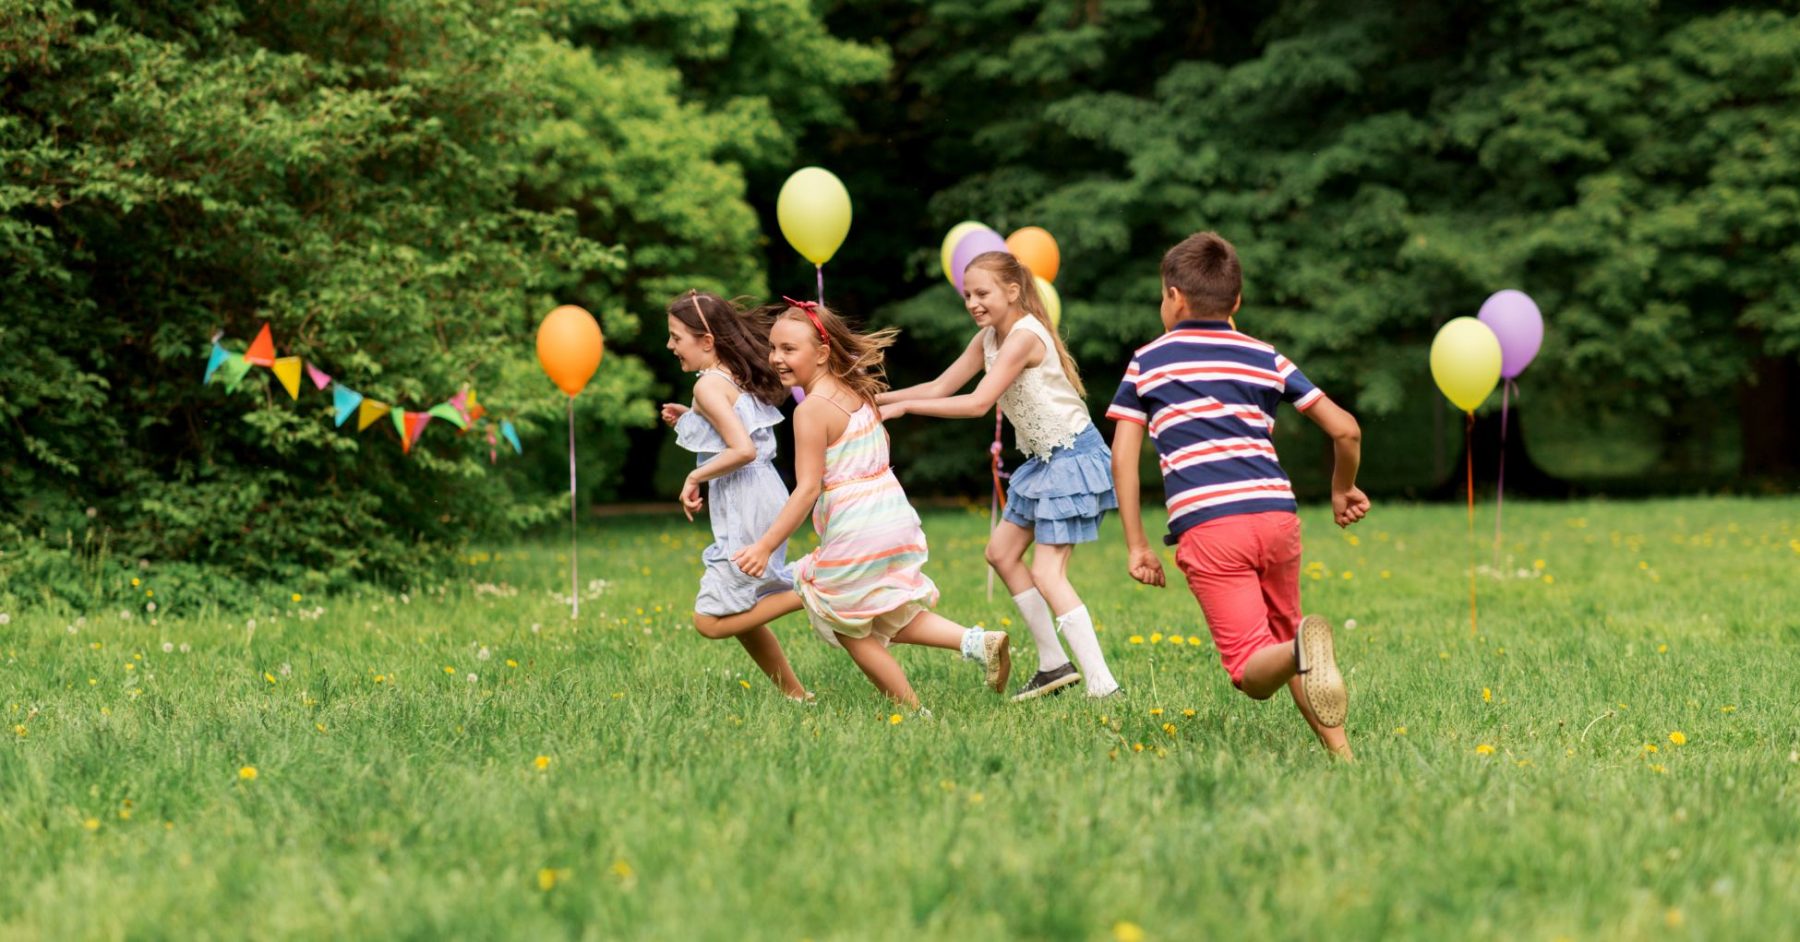 How to Throw a Cost-Effective Party in NYC Parks for Kids